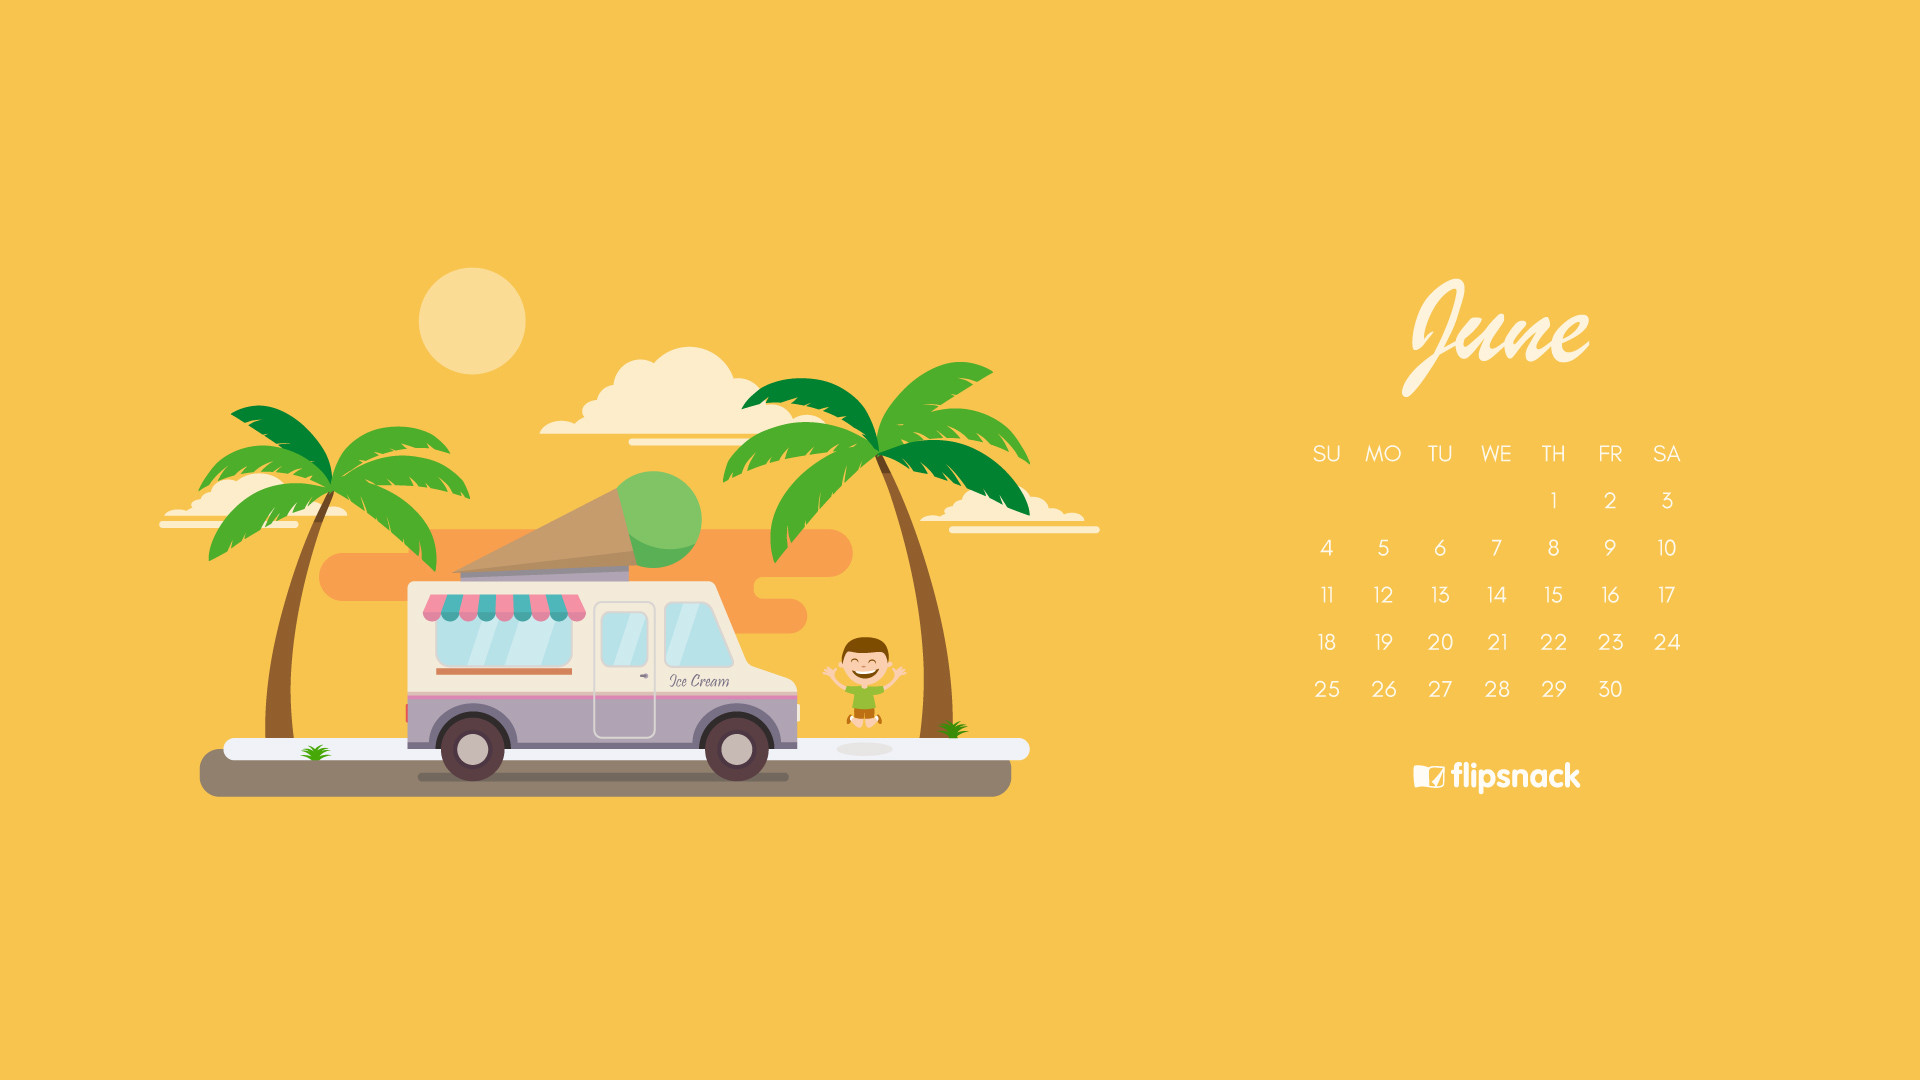 1920x1080 Good Vibes And Summer Dreams: Joyful Wallpapers For Your Desktop .